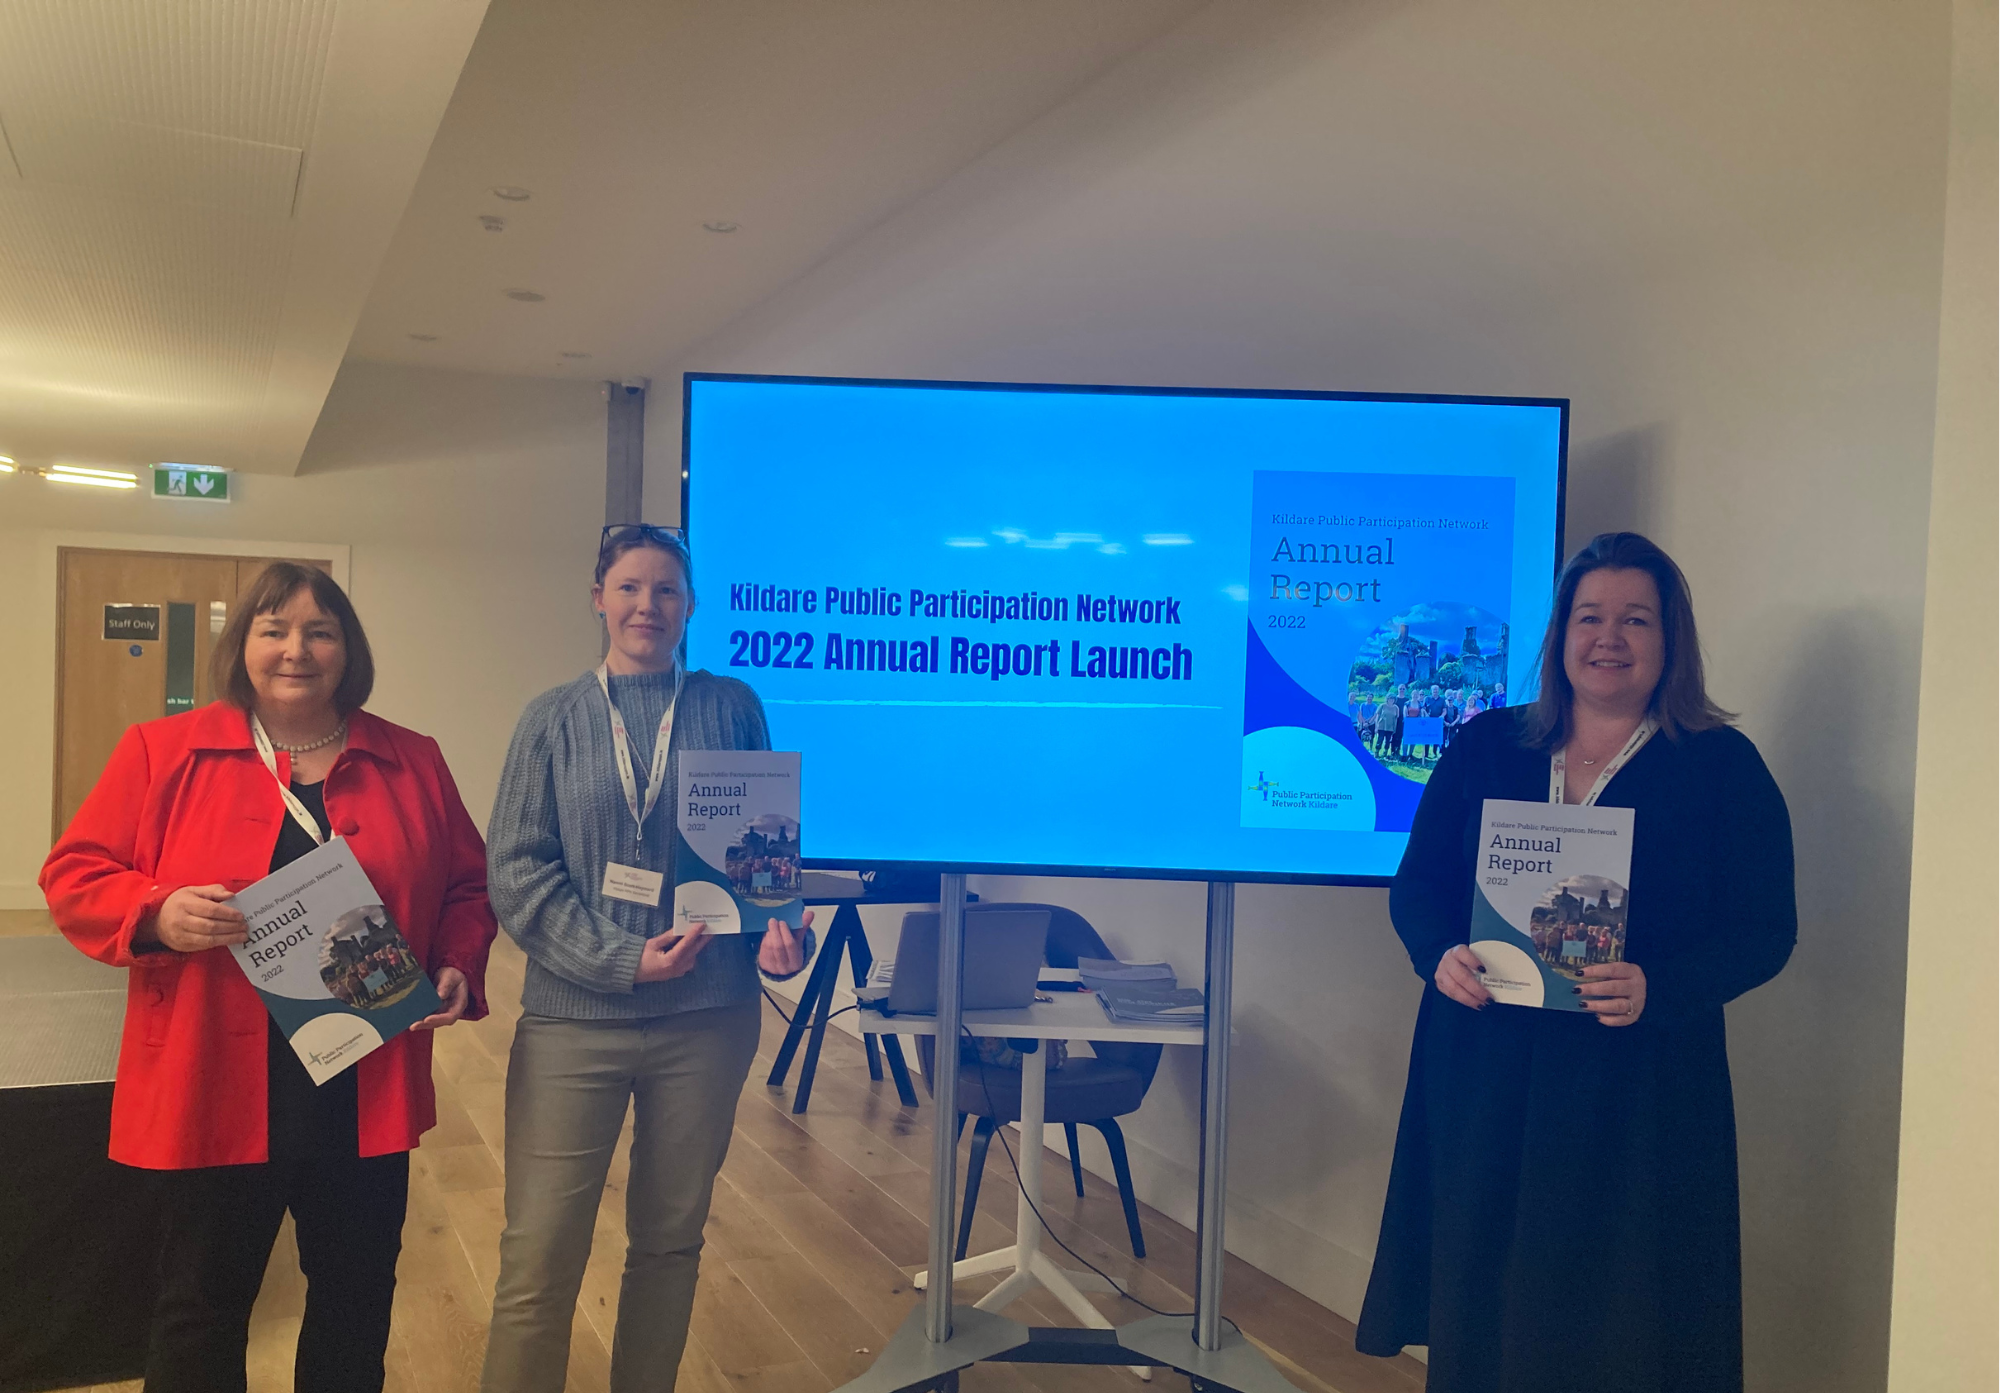 Launch of 2022 Annual Report